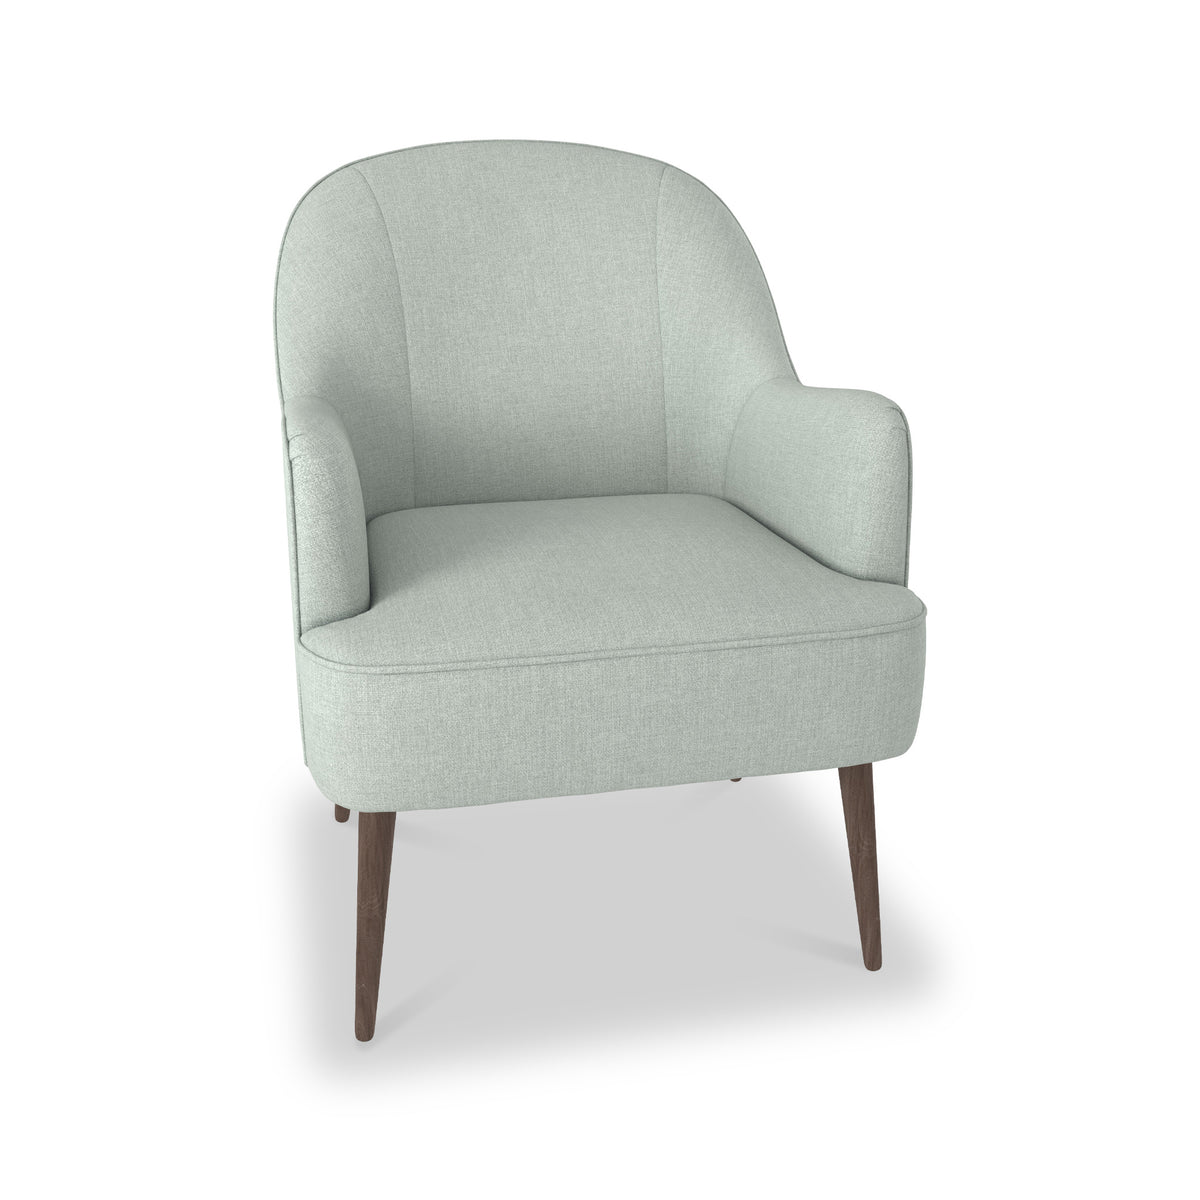 Todd Seamist Green Accent Chair for Living Room or Bedroom from Roseland Furniture